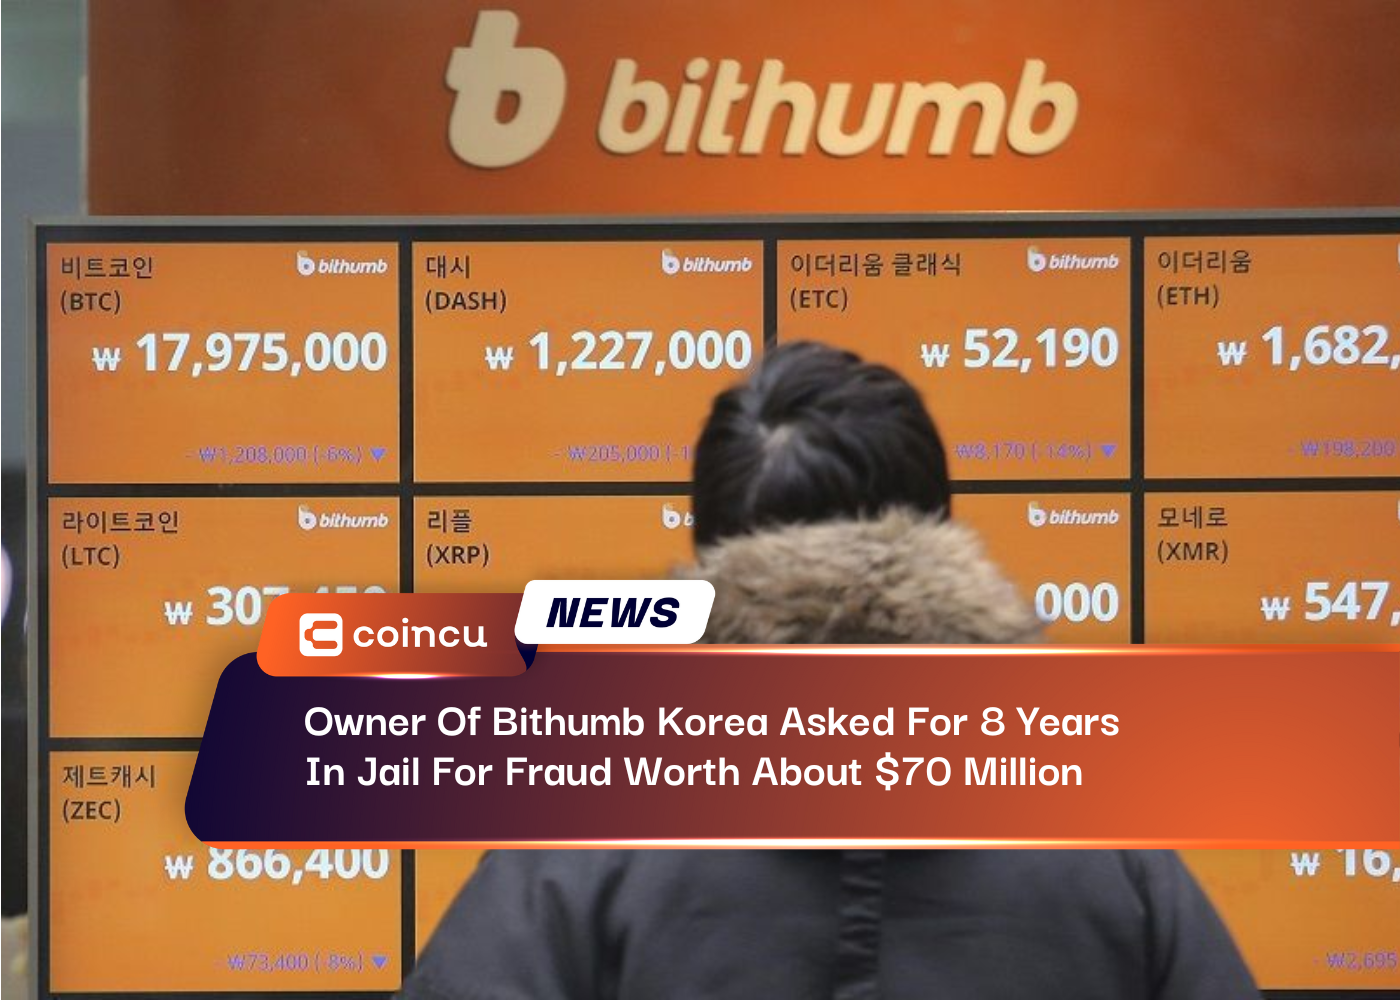 Owner Of Bithumb Korea Asked For 8 Years In Jail For Fraud Worth About $70 Million